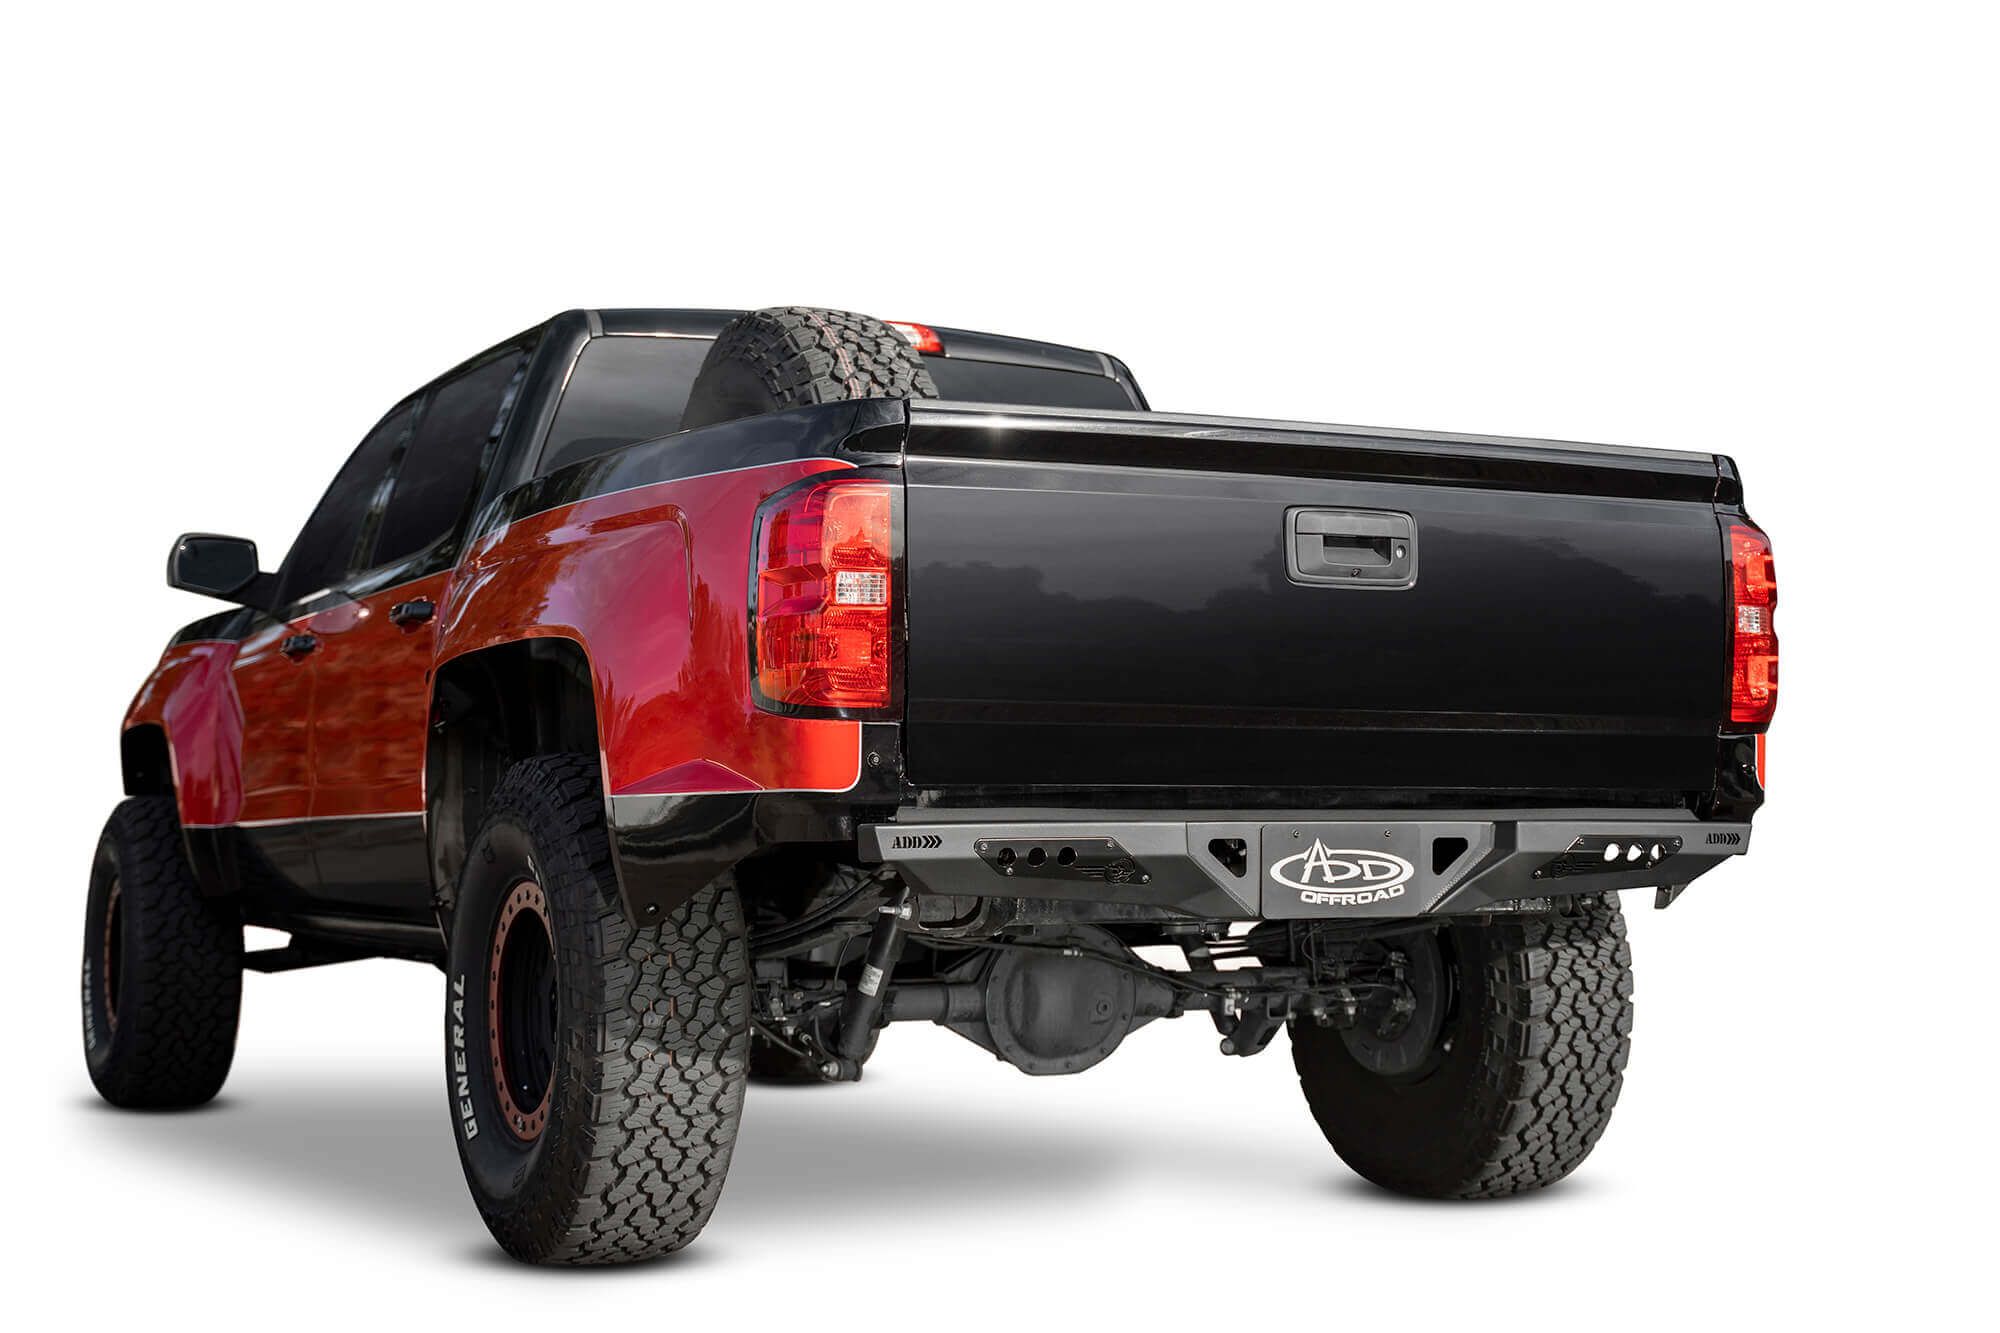 Check Out Addictive Desert Design's Rock Fighter Bumpers For Chevy & GMC